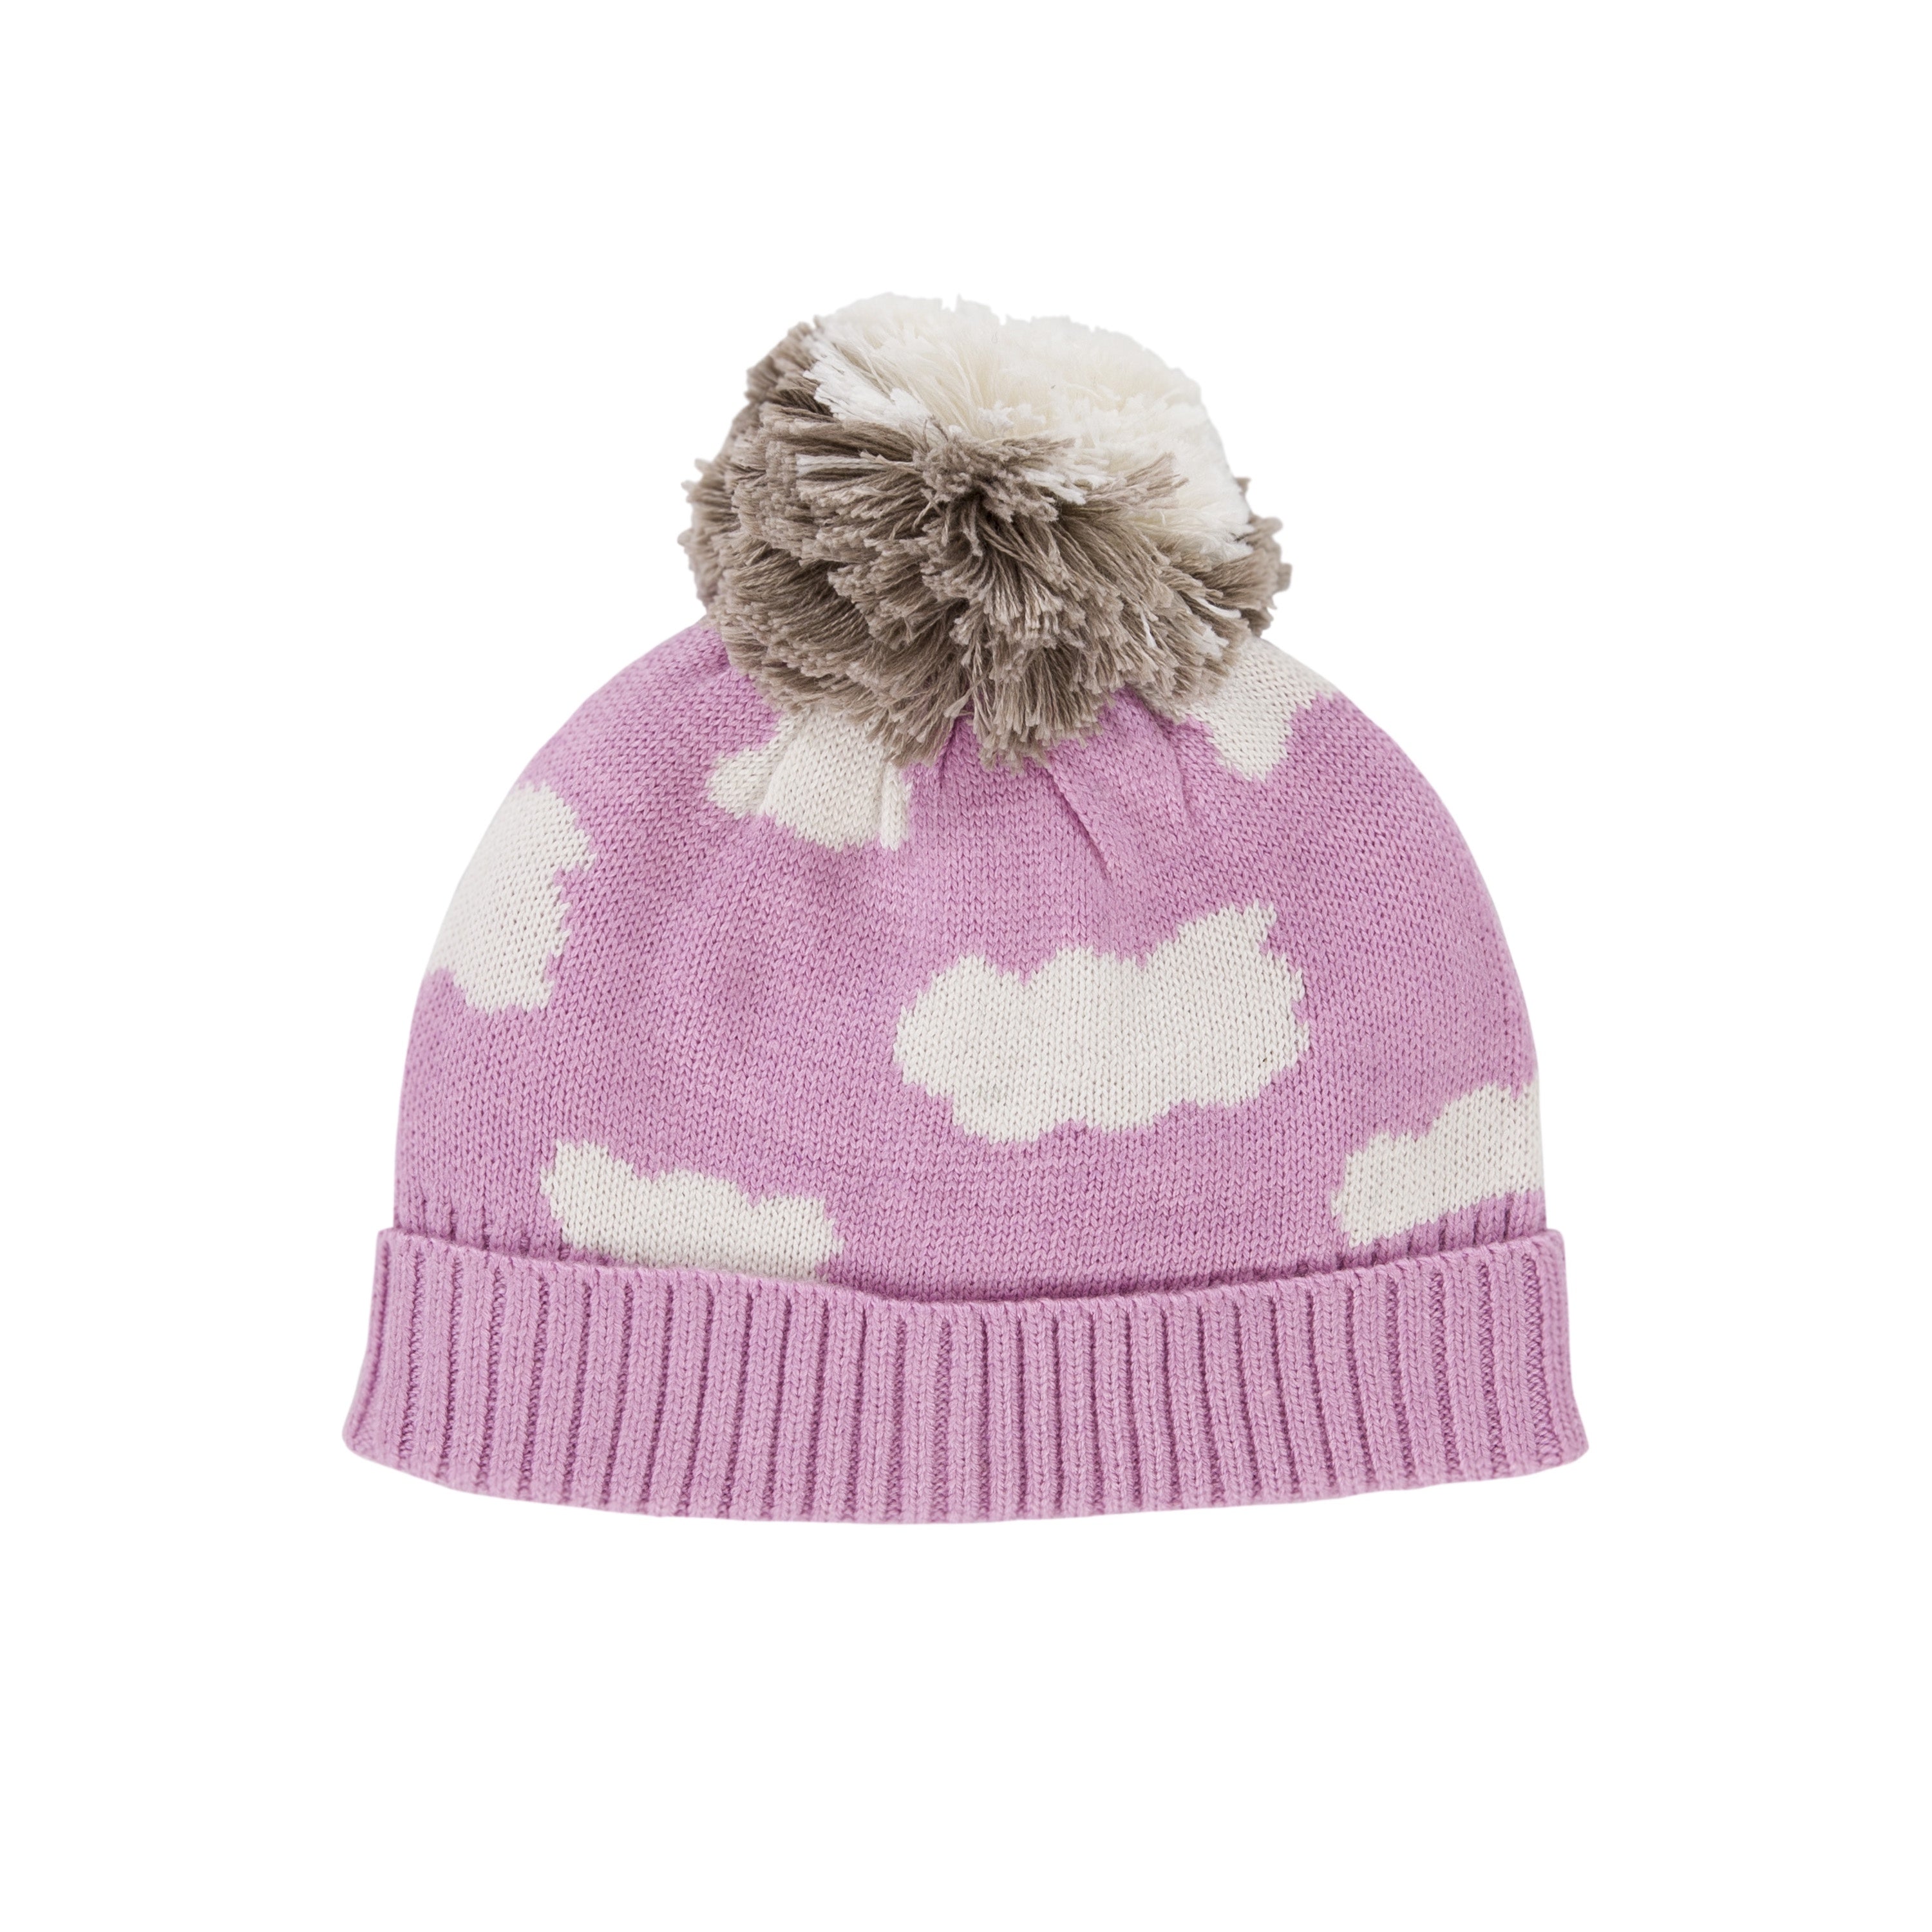 Acorn - Up in the Clouds Beanie - Lilac